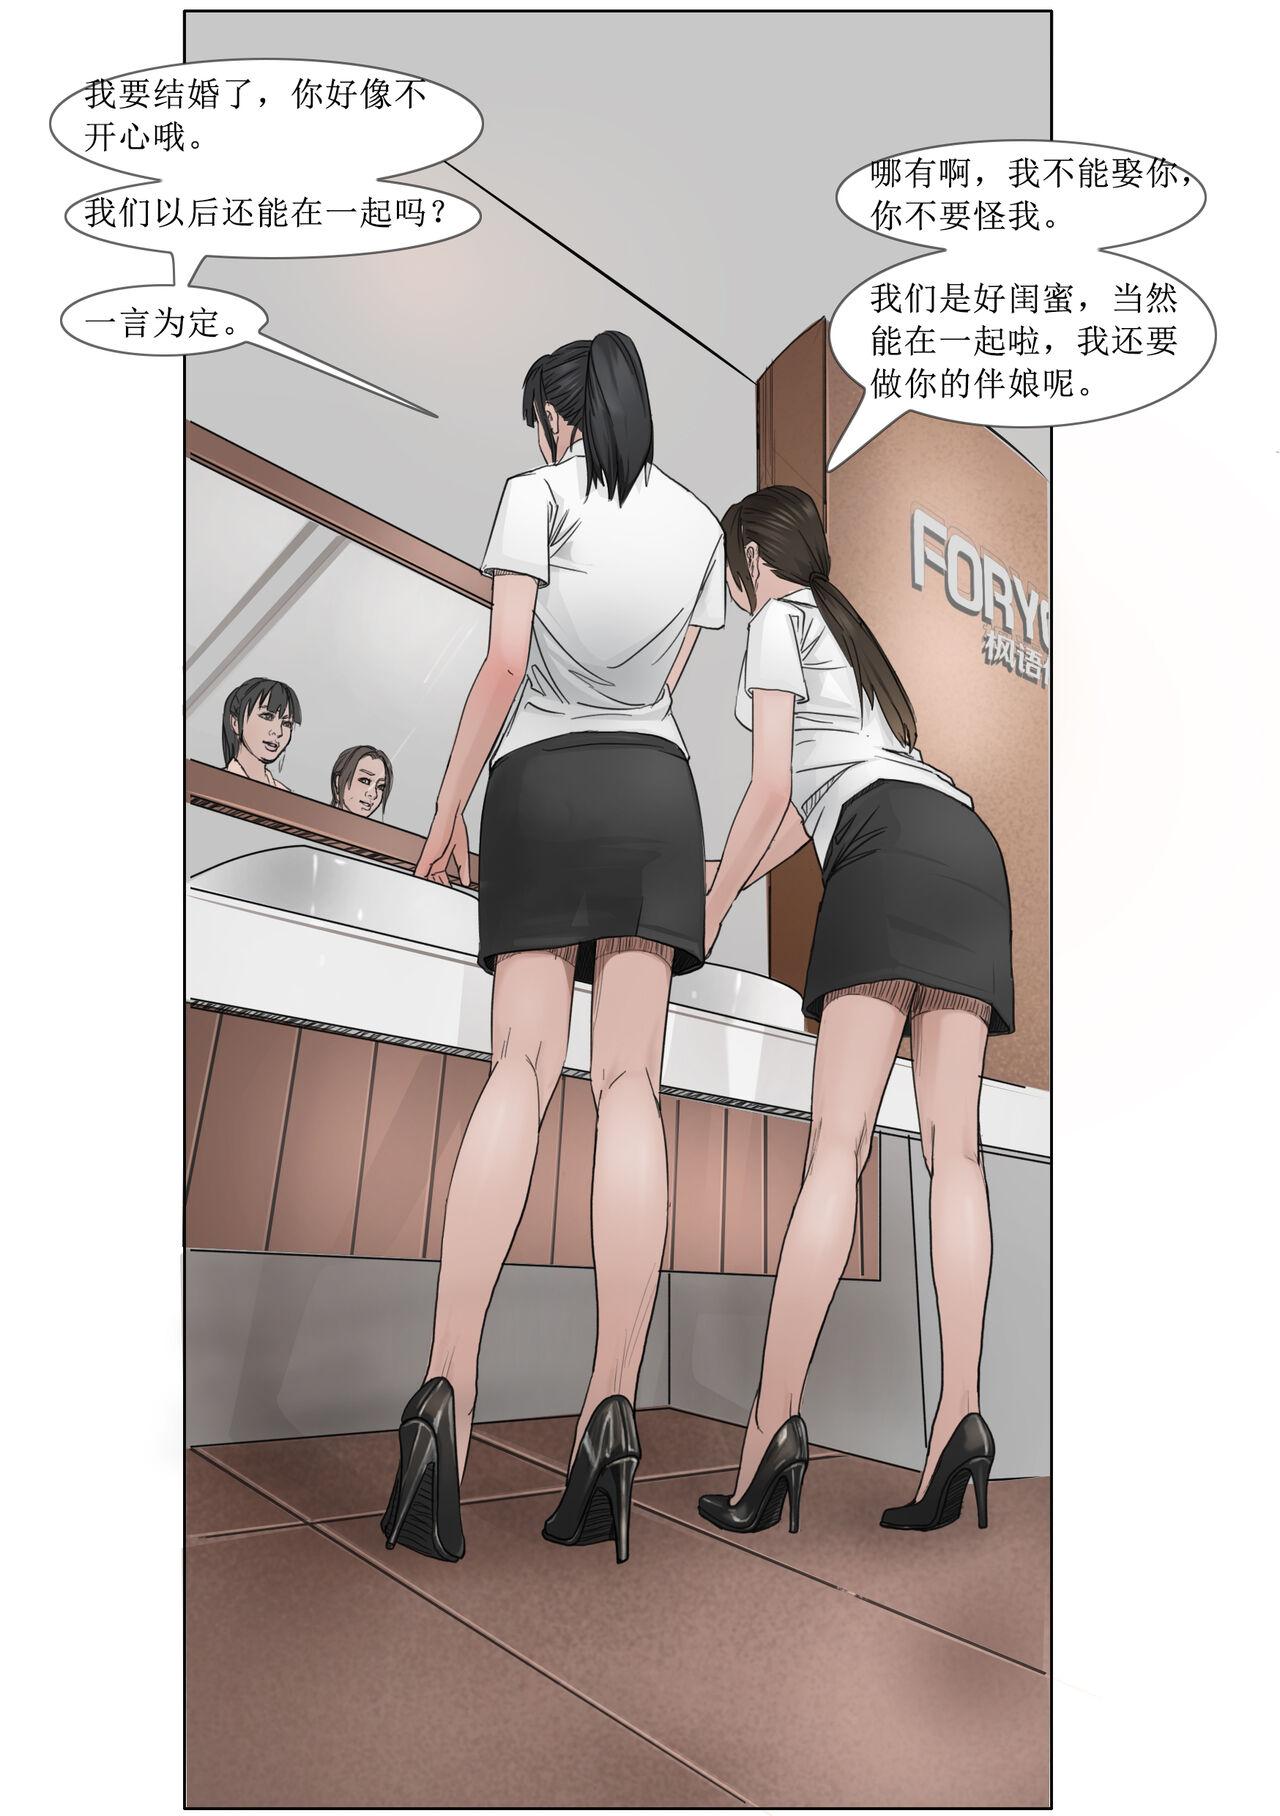 Masterbation 枫语Foryou《阿花与阿朵》第一话 A hua and A duo 1 Chinese Magrinha - Page 9